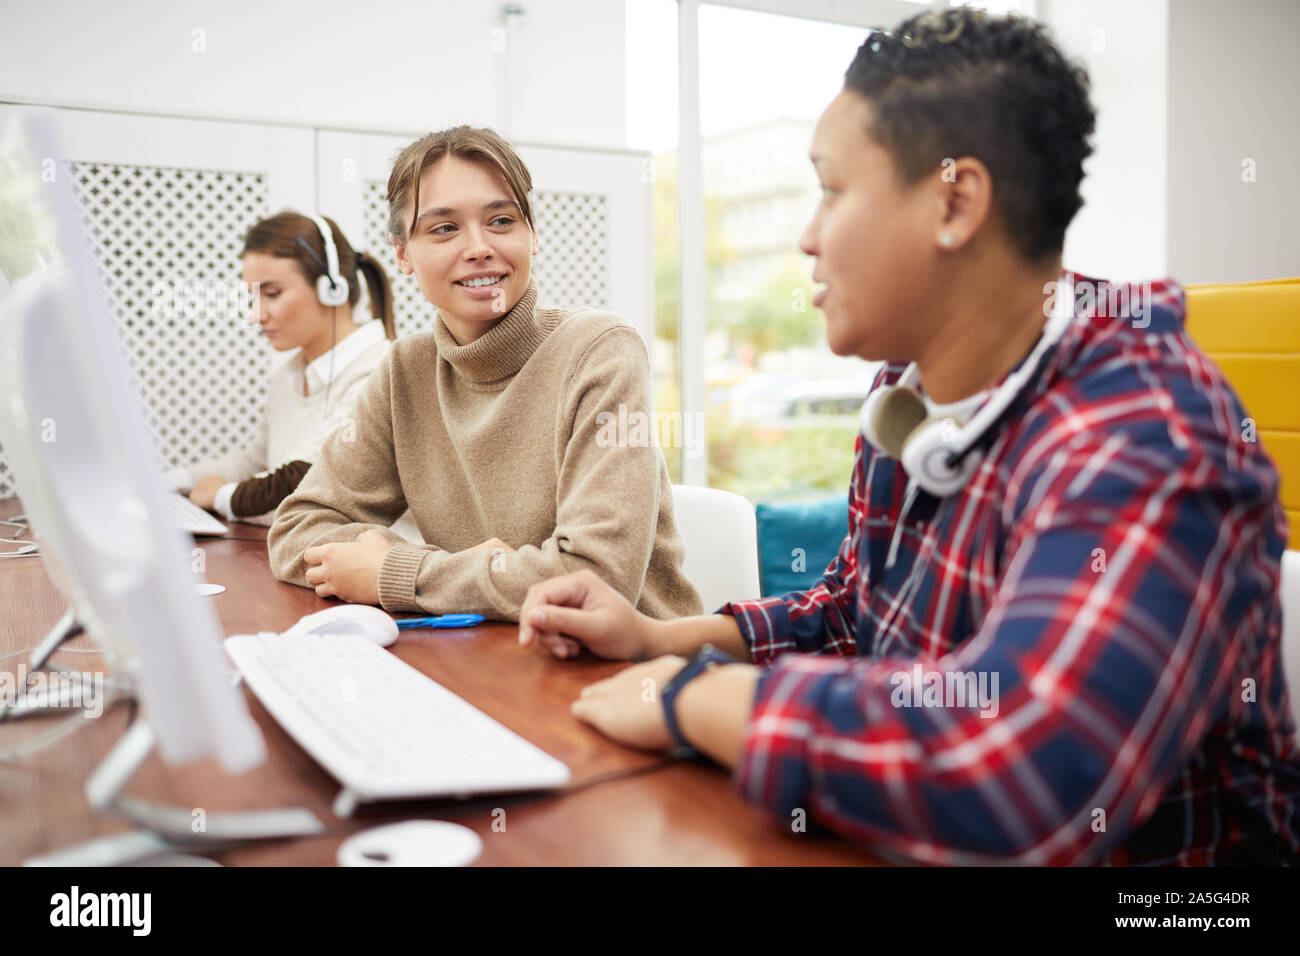 College students sitting in row and chatting while studying in computer class, focus on smiling young woman talking to friend, copy space Stock Photo